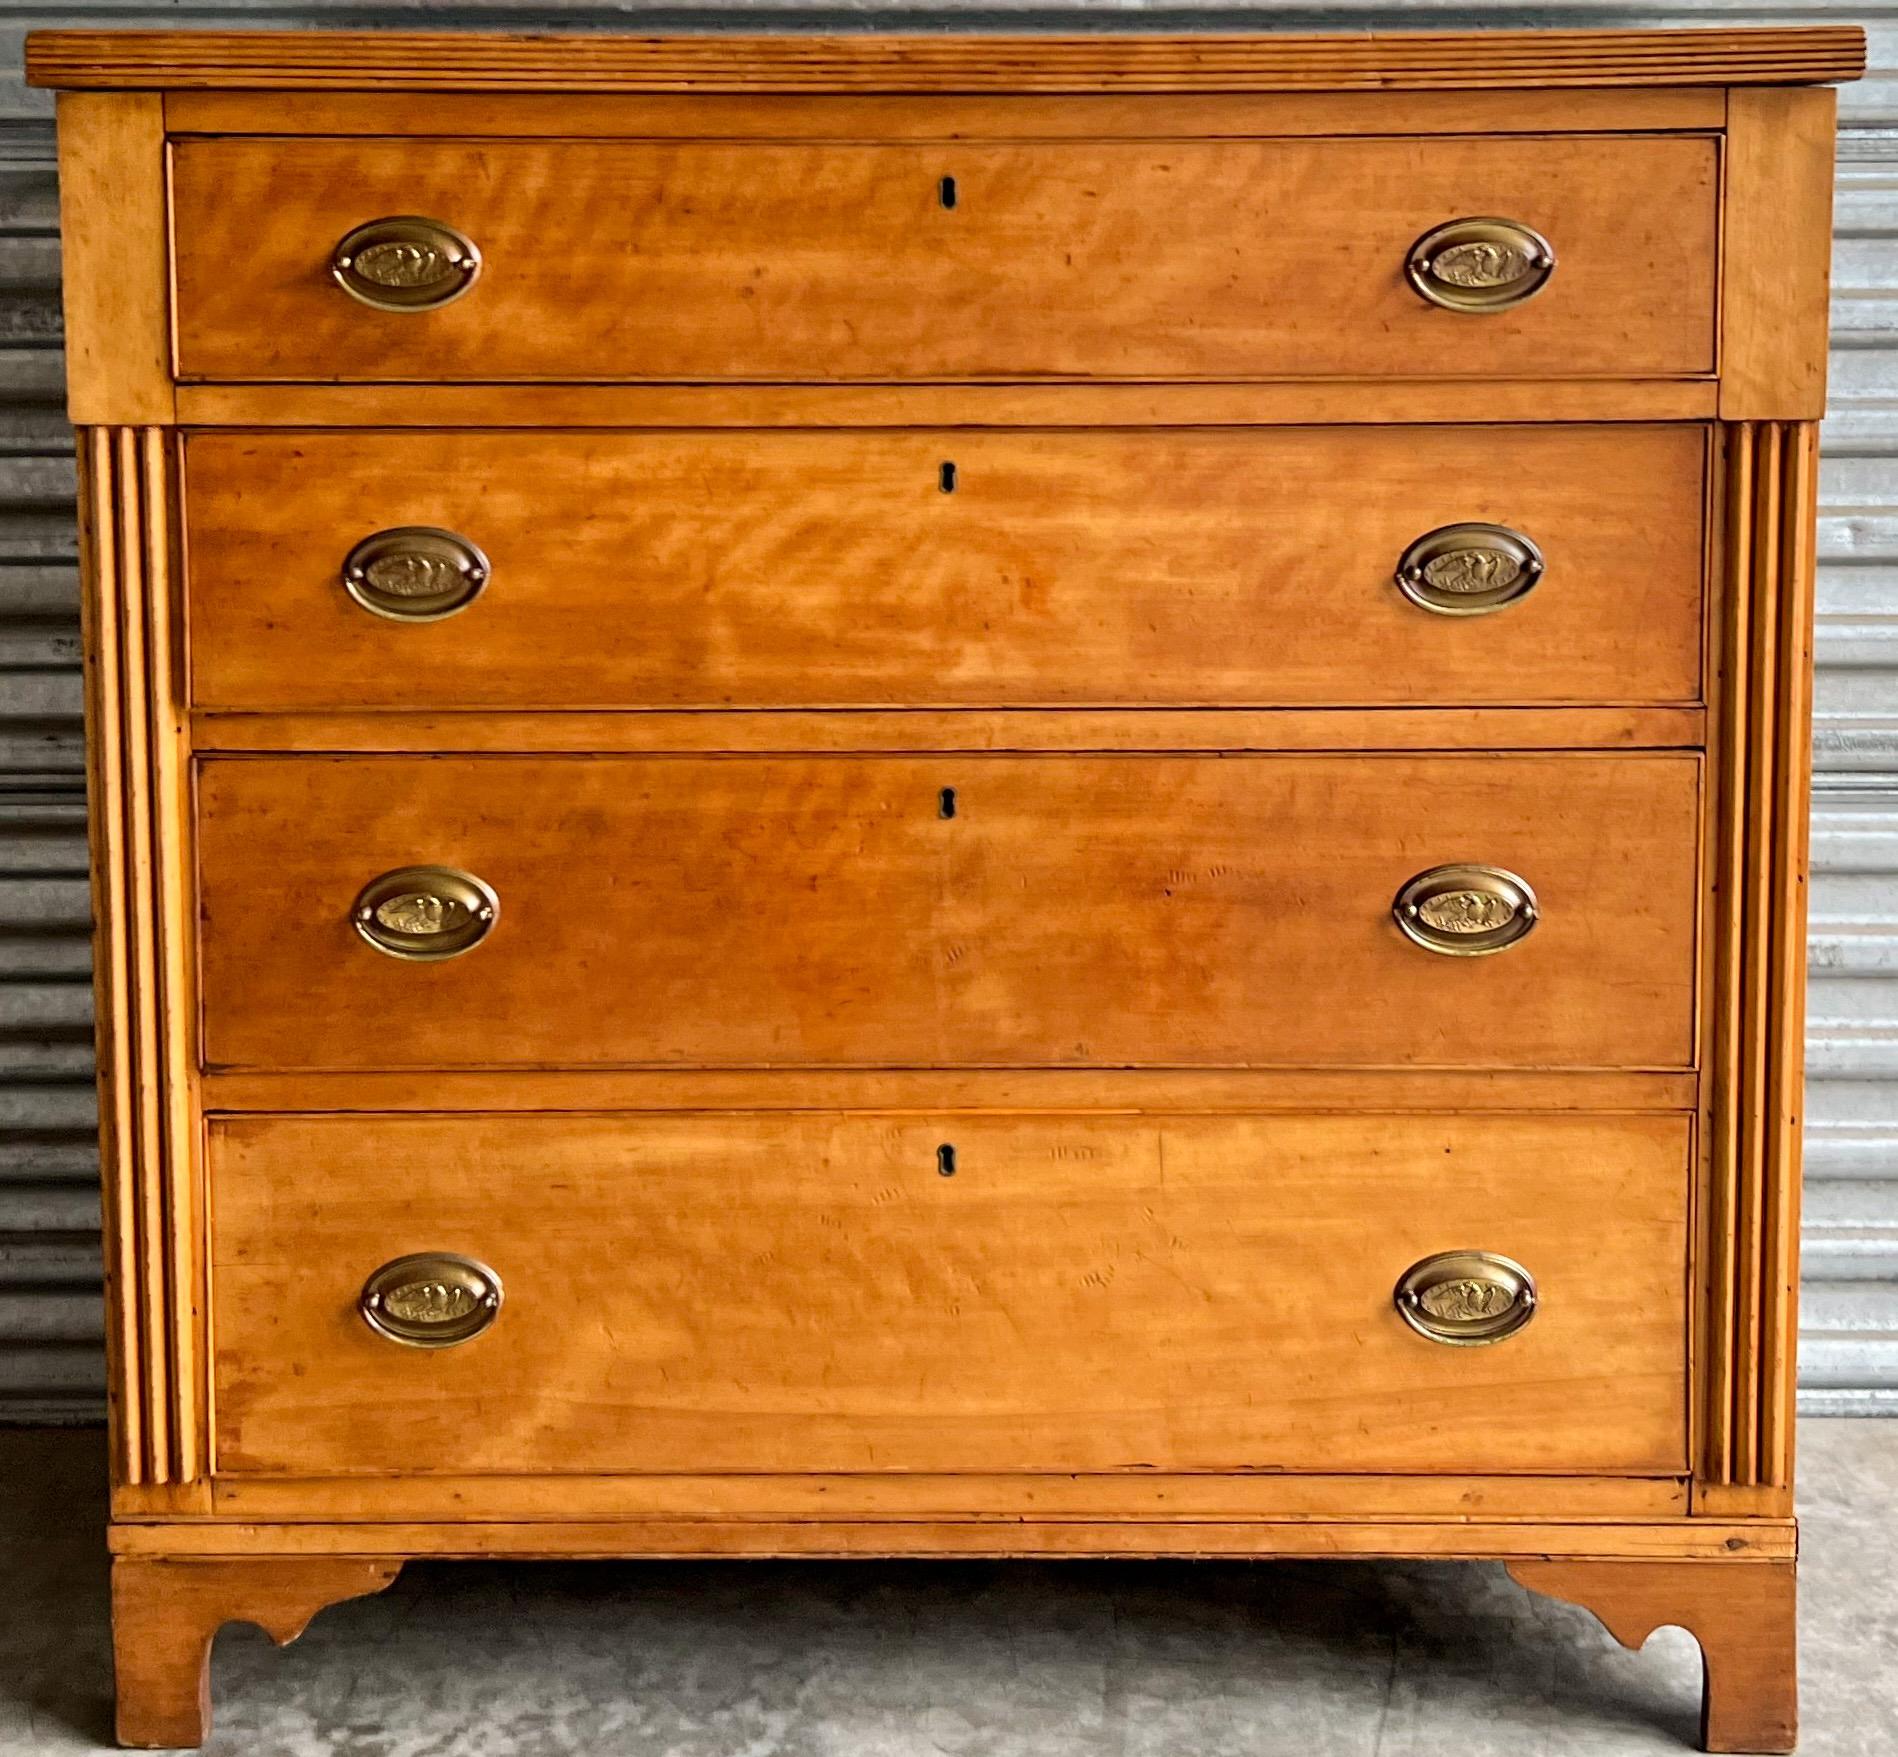 19th-C. American Federal Style Tiger Maple Chest or Commode For Sale 4